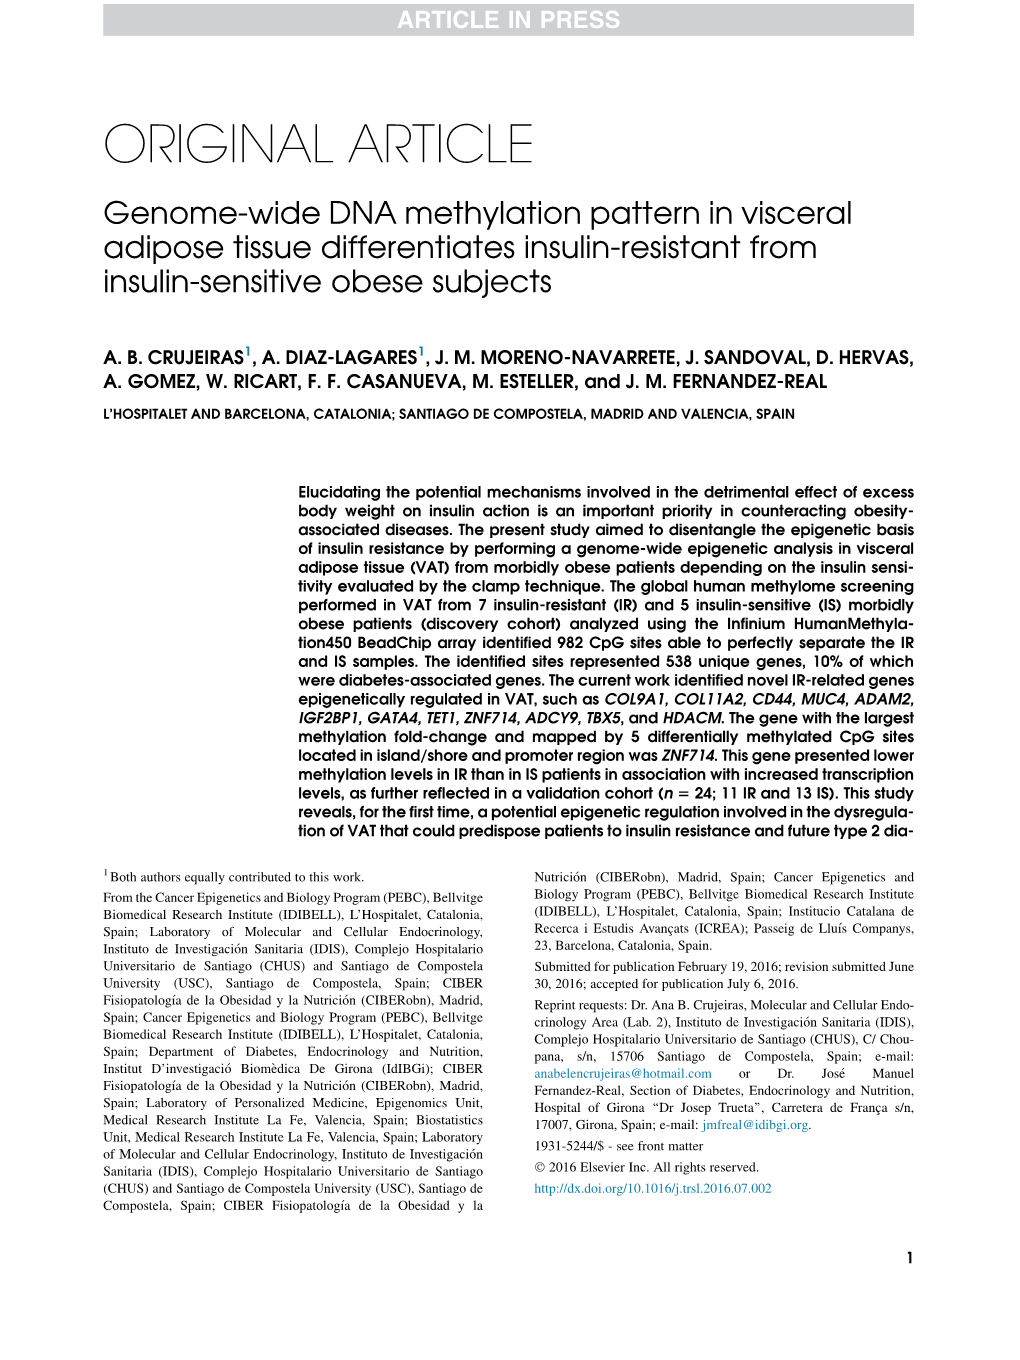 Genome-Wide DNA Methylation Pattern in Visceral Adipose Tissue Differentiates Insulin-Resistant from Insulin-Sensitive Obese Subjects